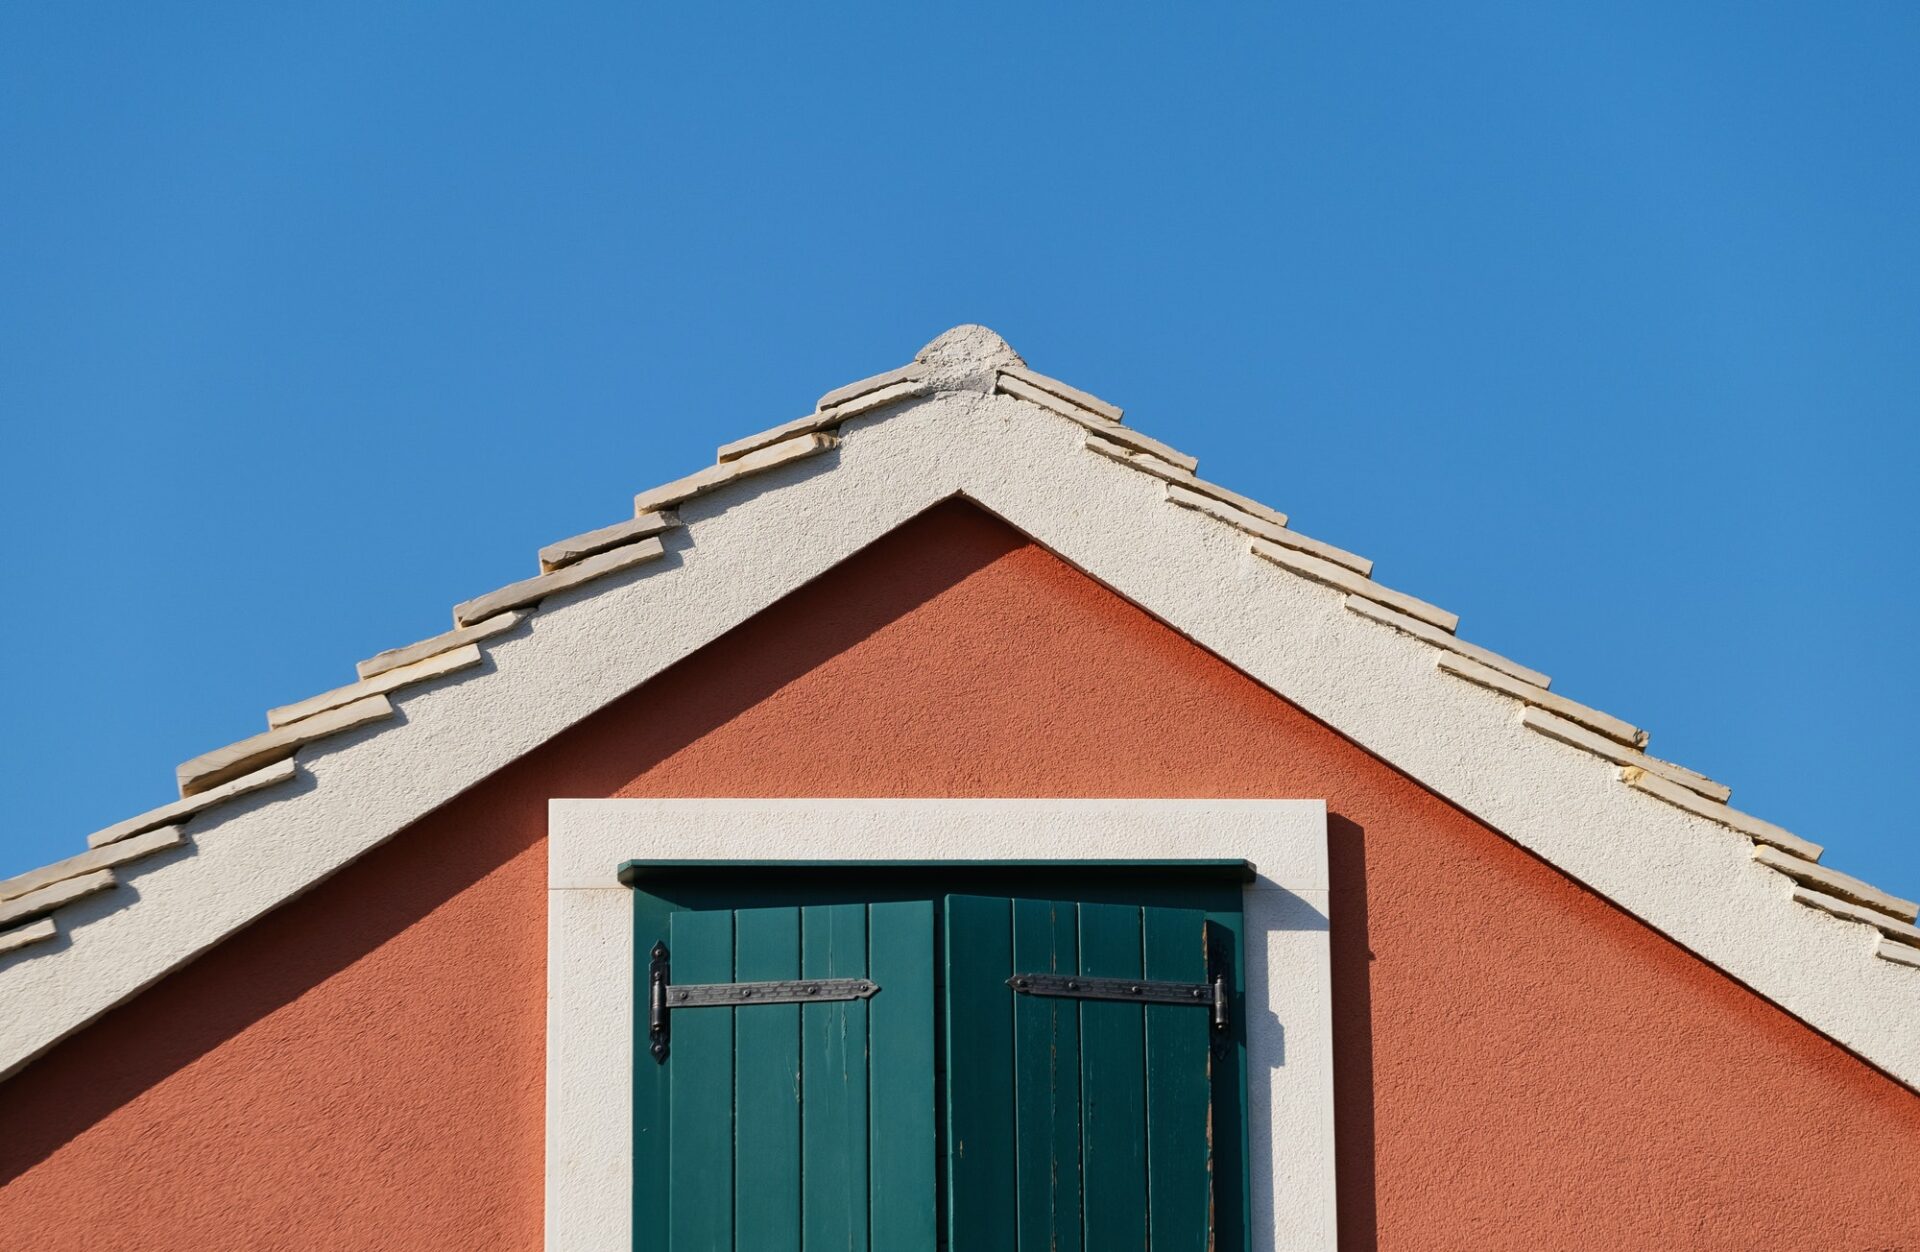 The house on the blue sky background. Roof and window with shutters.